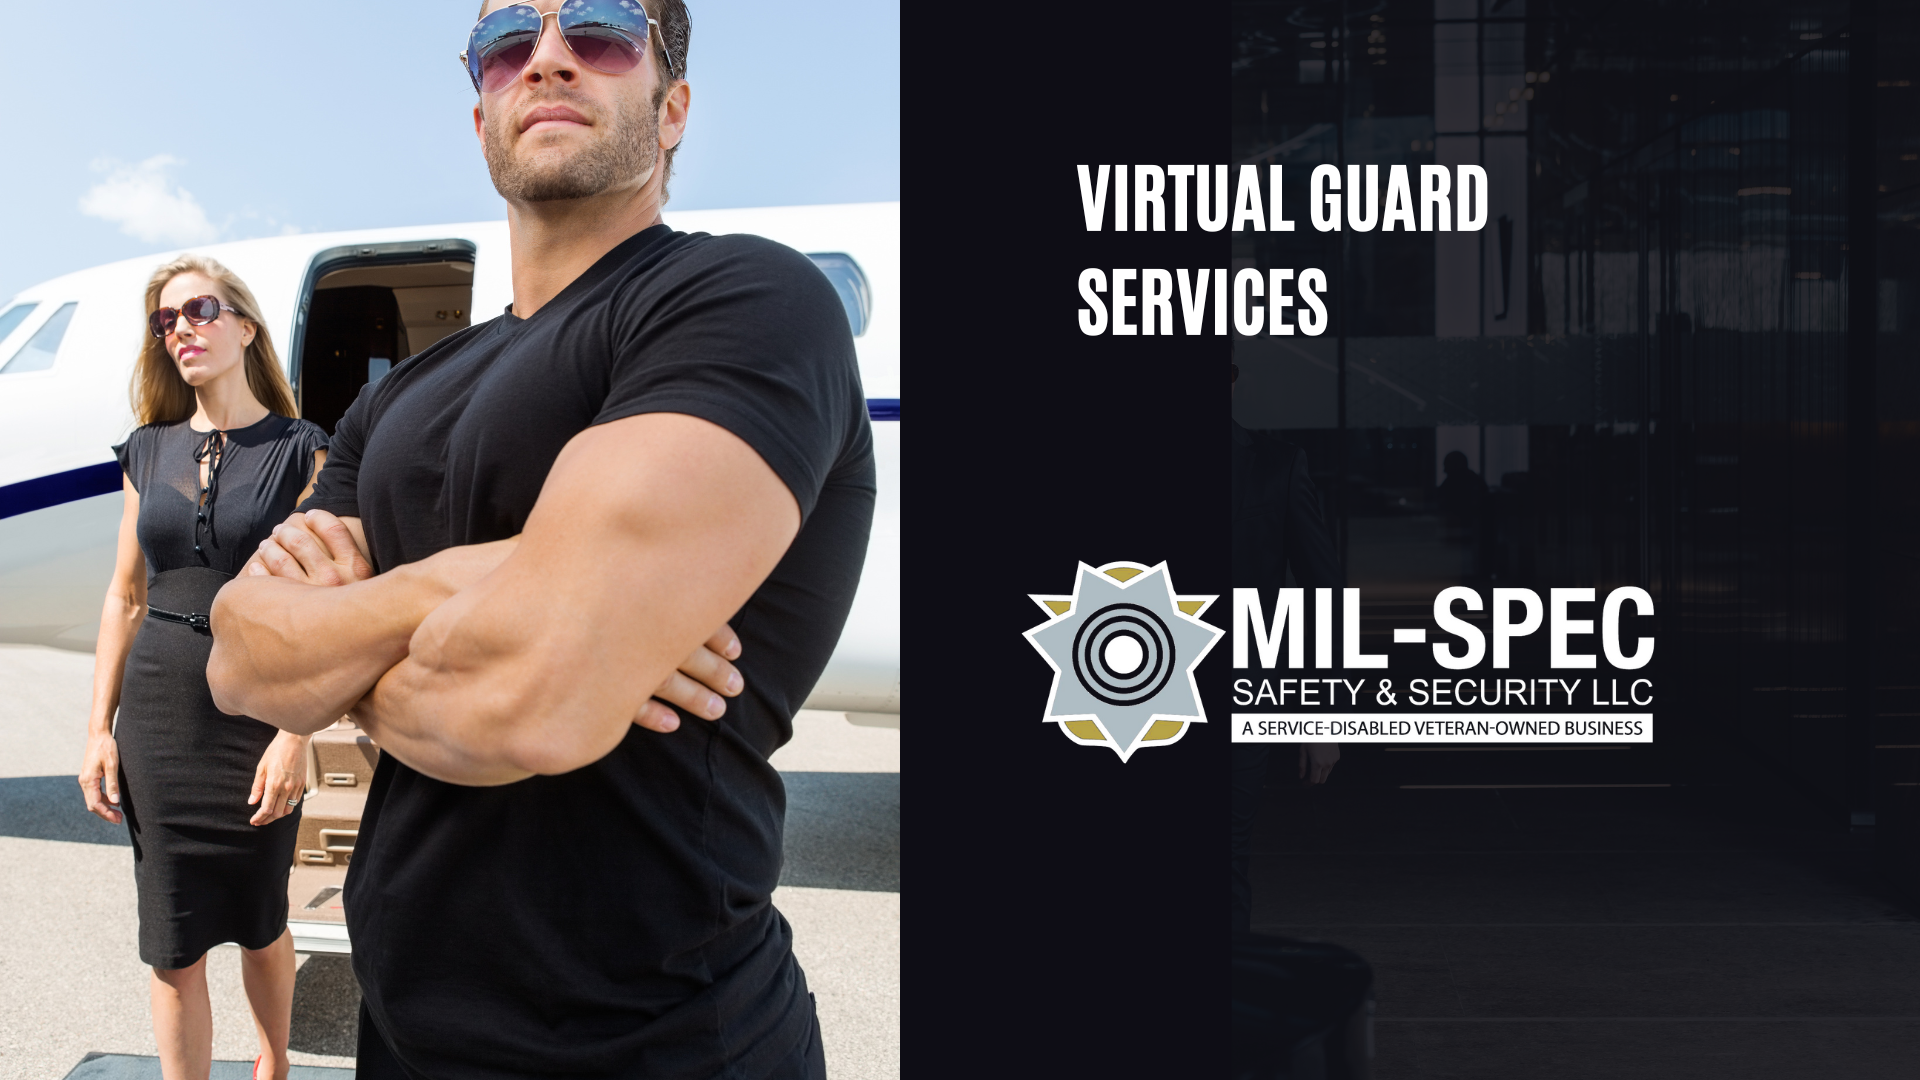 Virtual Guard Services Monitoring System at Mil-Spec Safety and Security"